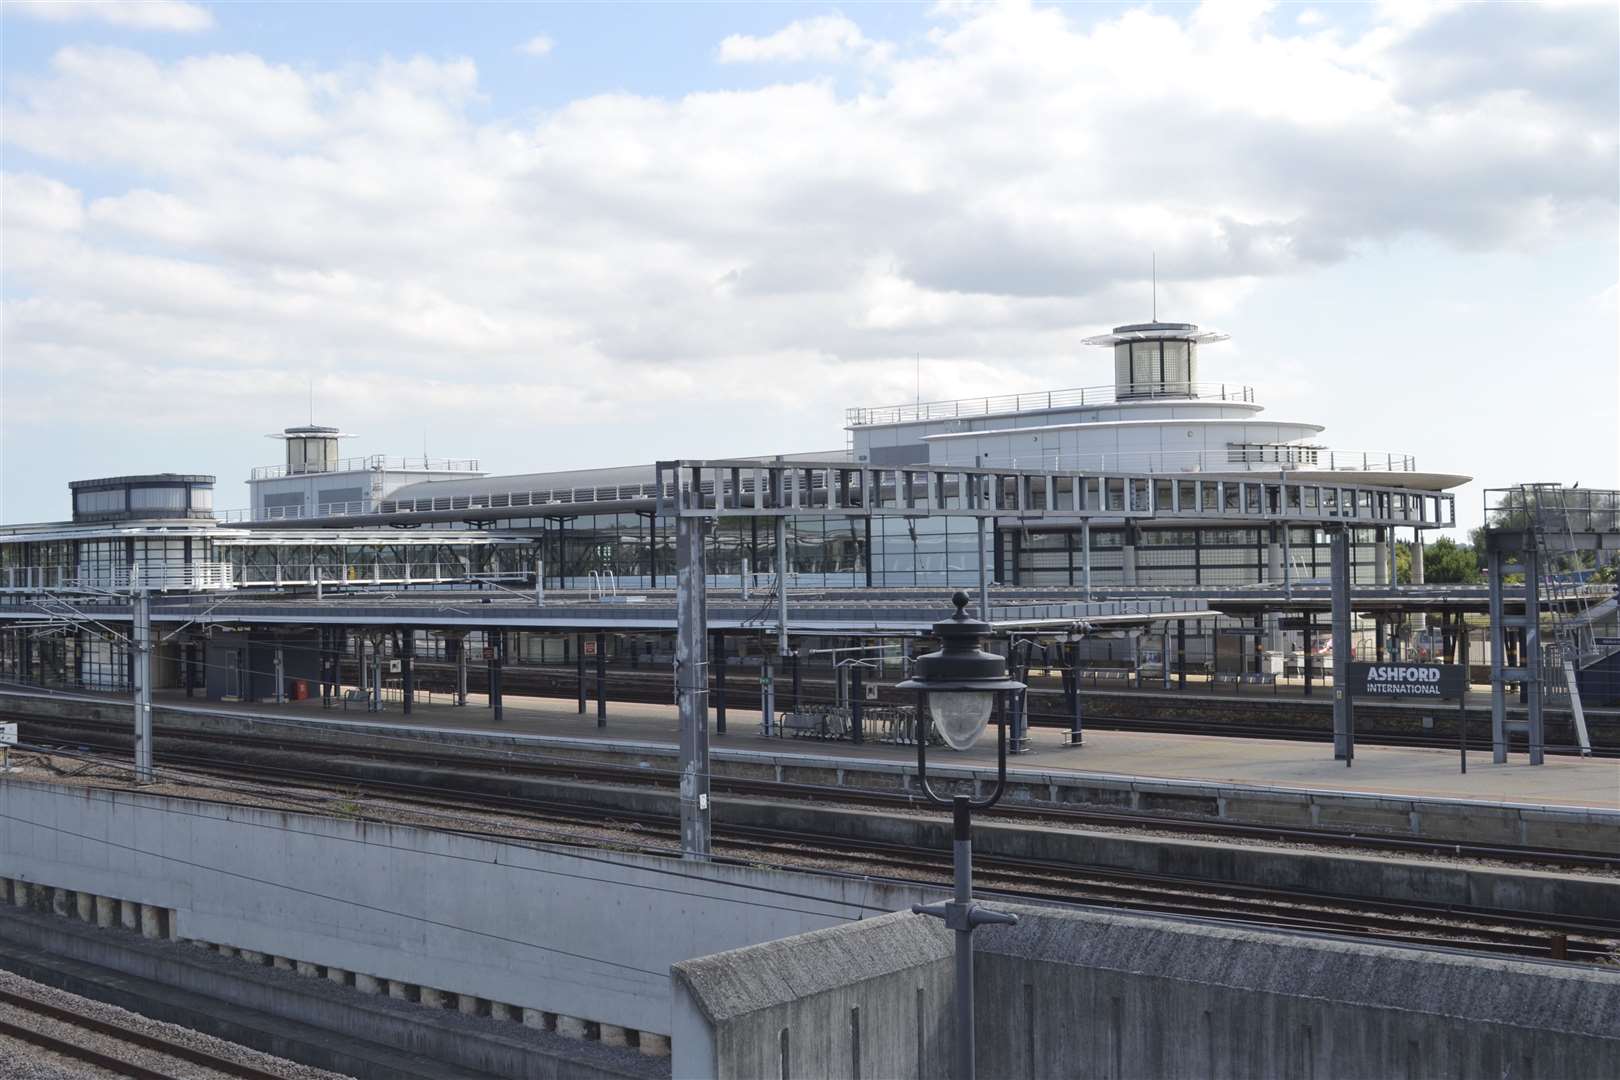 The 14-year-old was arrested at Ashford International Station